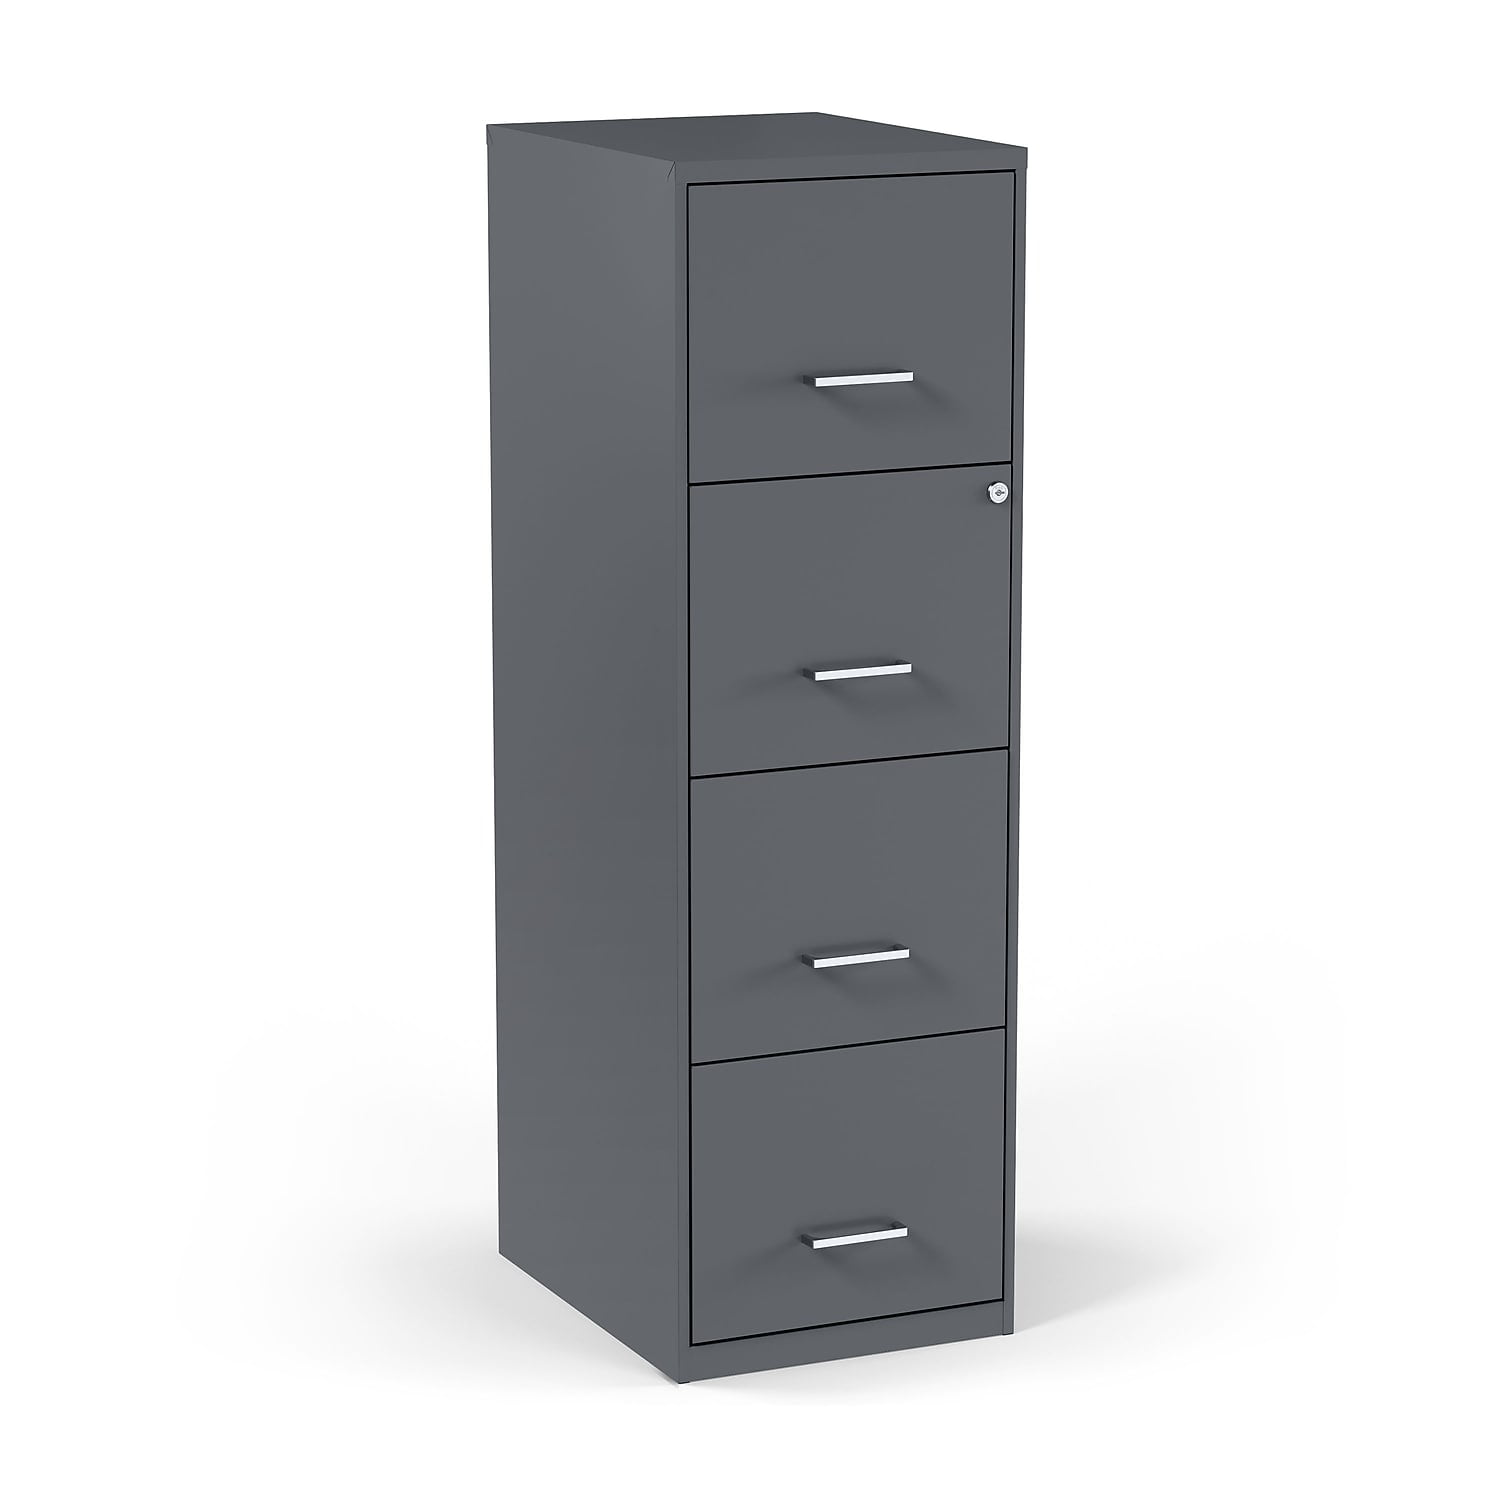 4 Drawers 15.25 x 14.00 x 14.50 Inches Black Details about   Vaultz Locking CD File Cabinet 